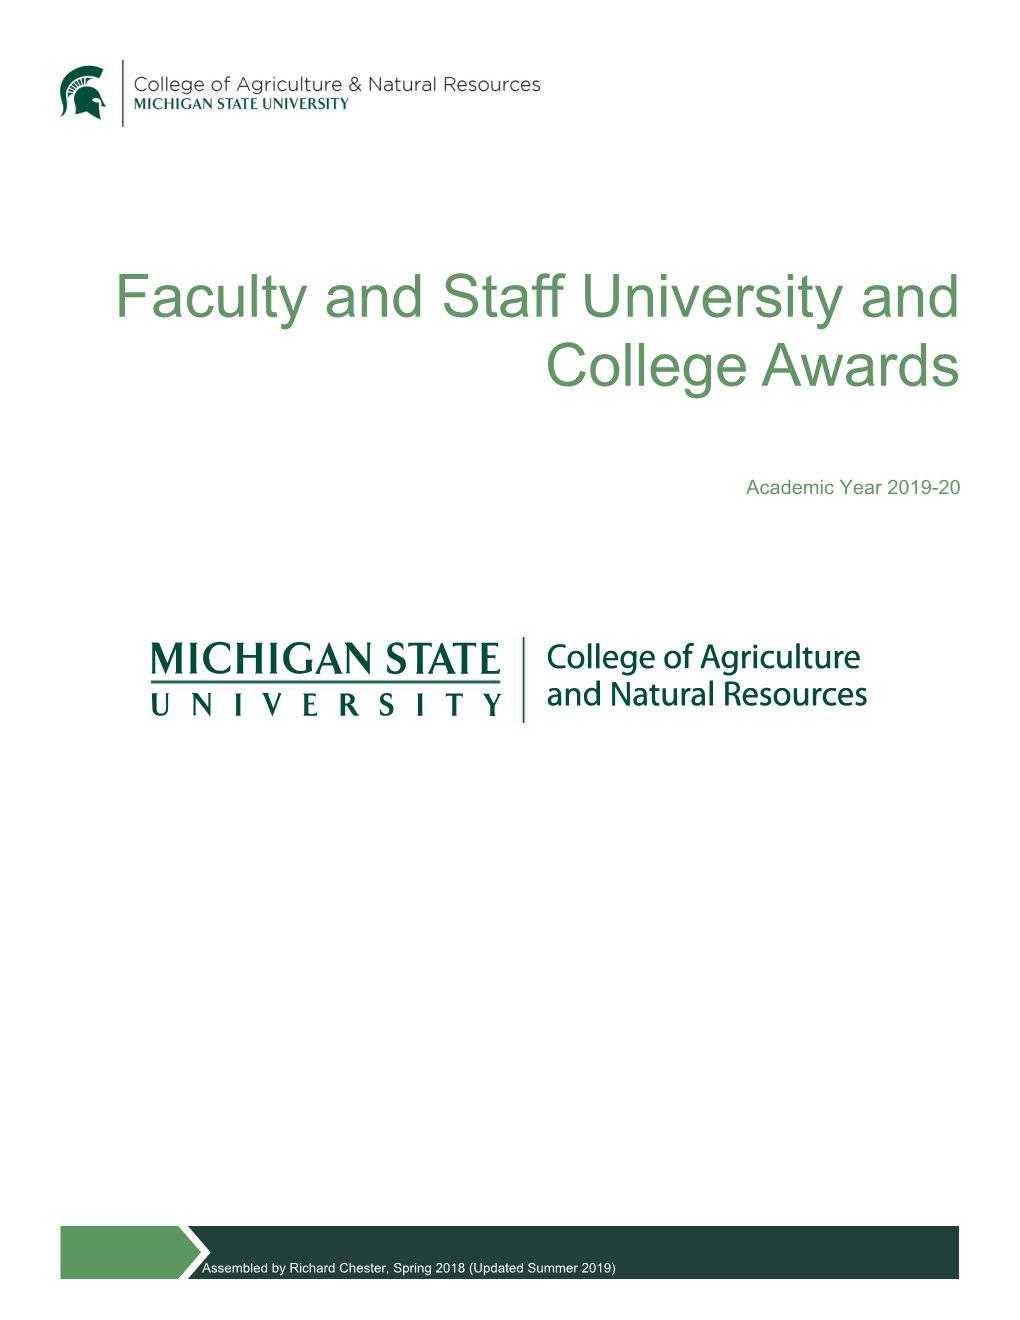 Faculty and Staff University and College Awards